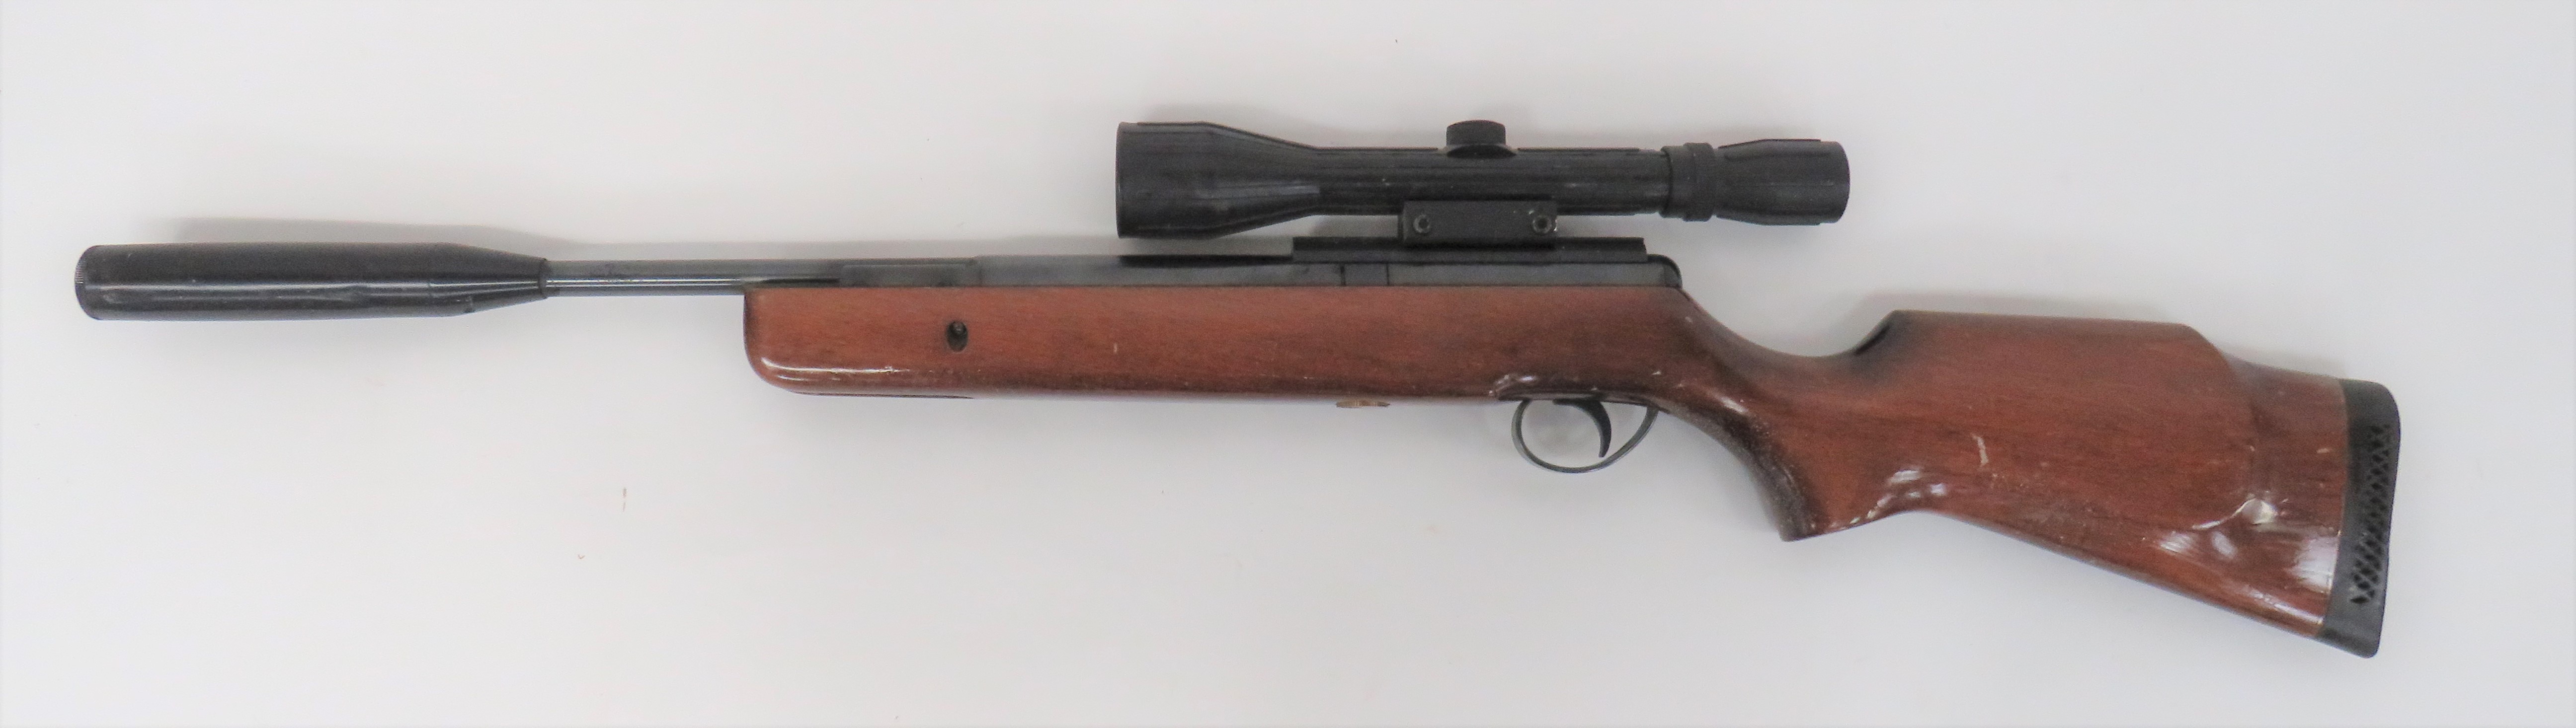 BSA Air Rifle With Silencer and Telescopic Sight .22, 14 1/2 inch, blackened barrel with integral - Image 2 of 3